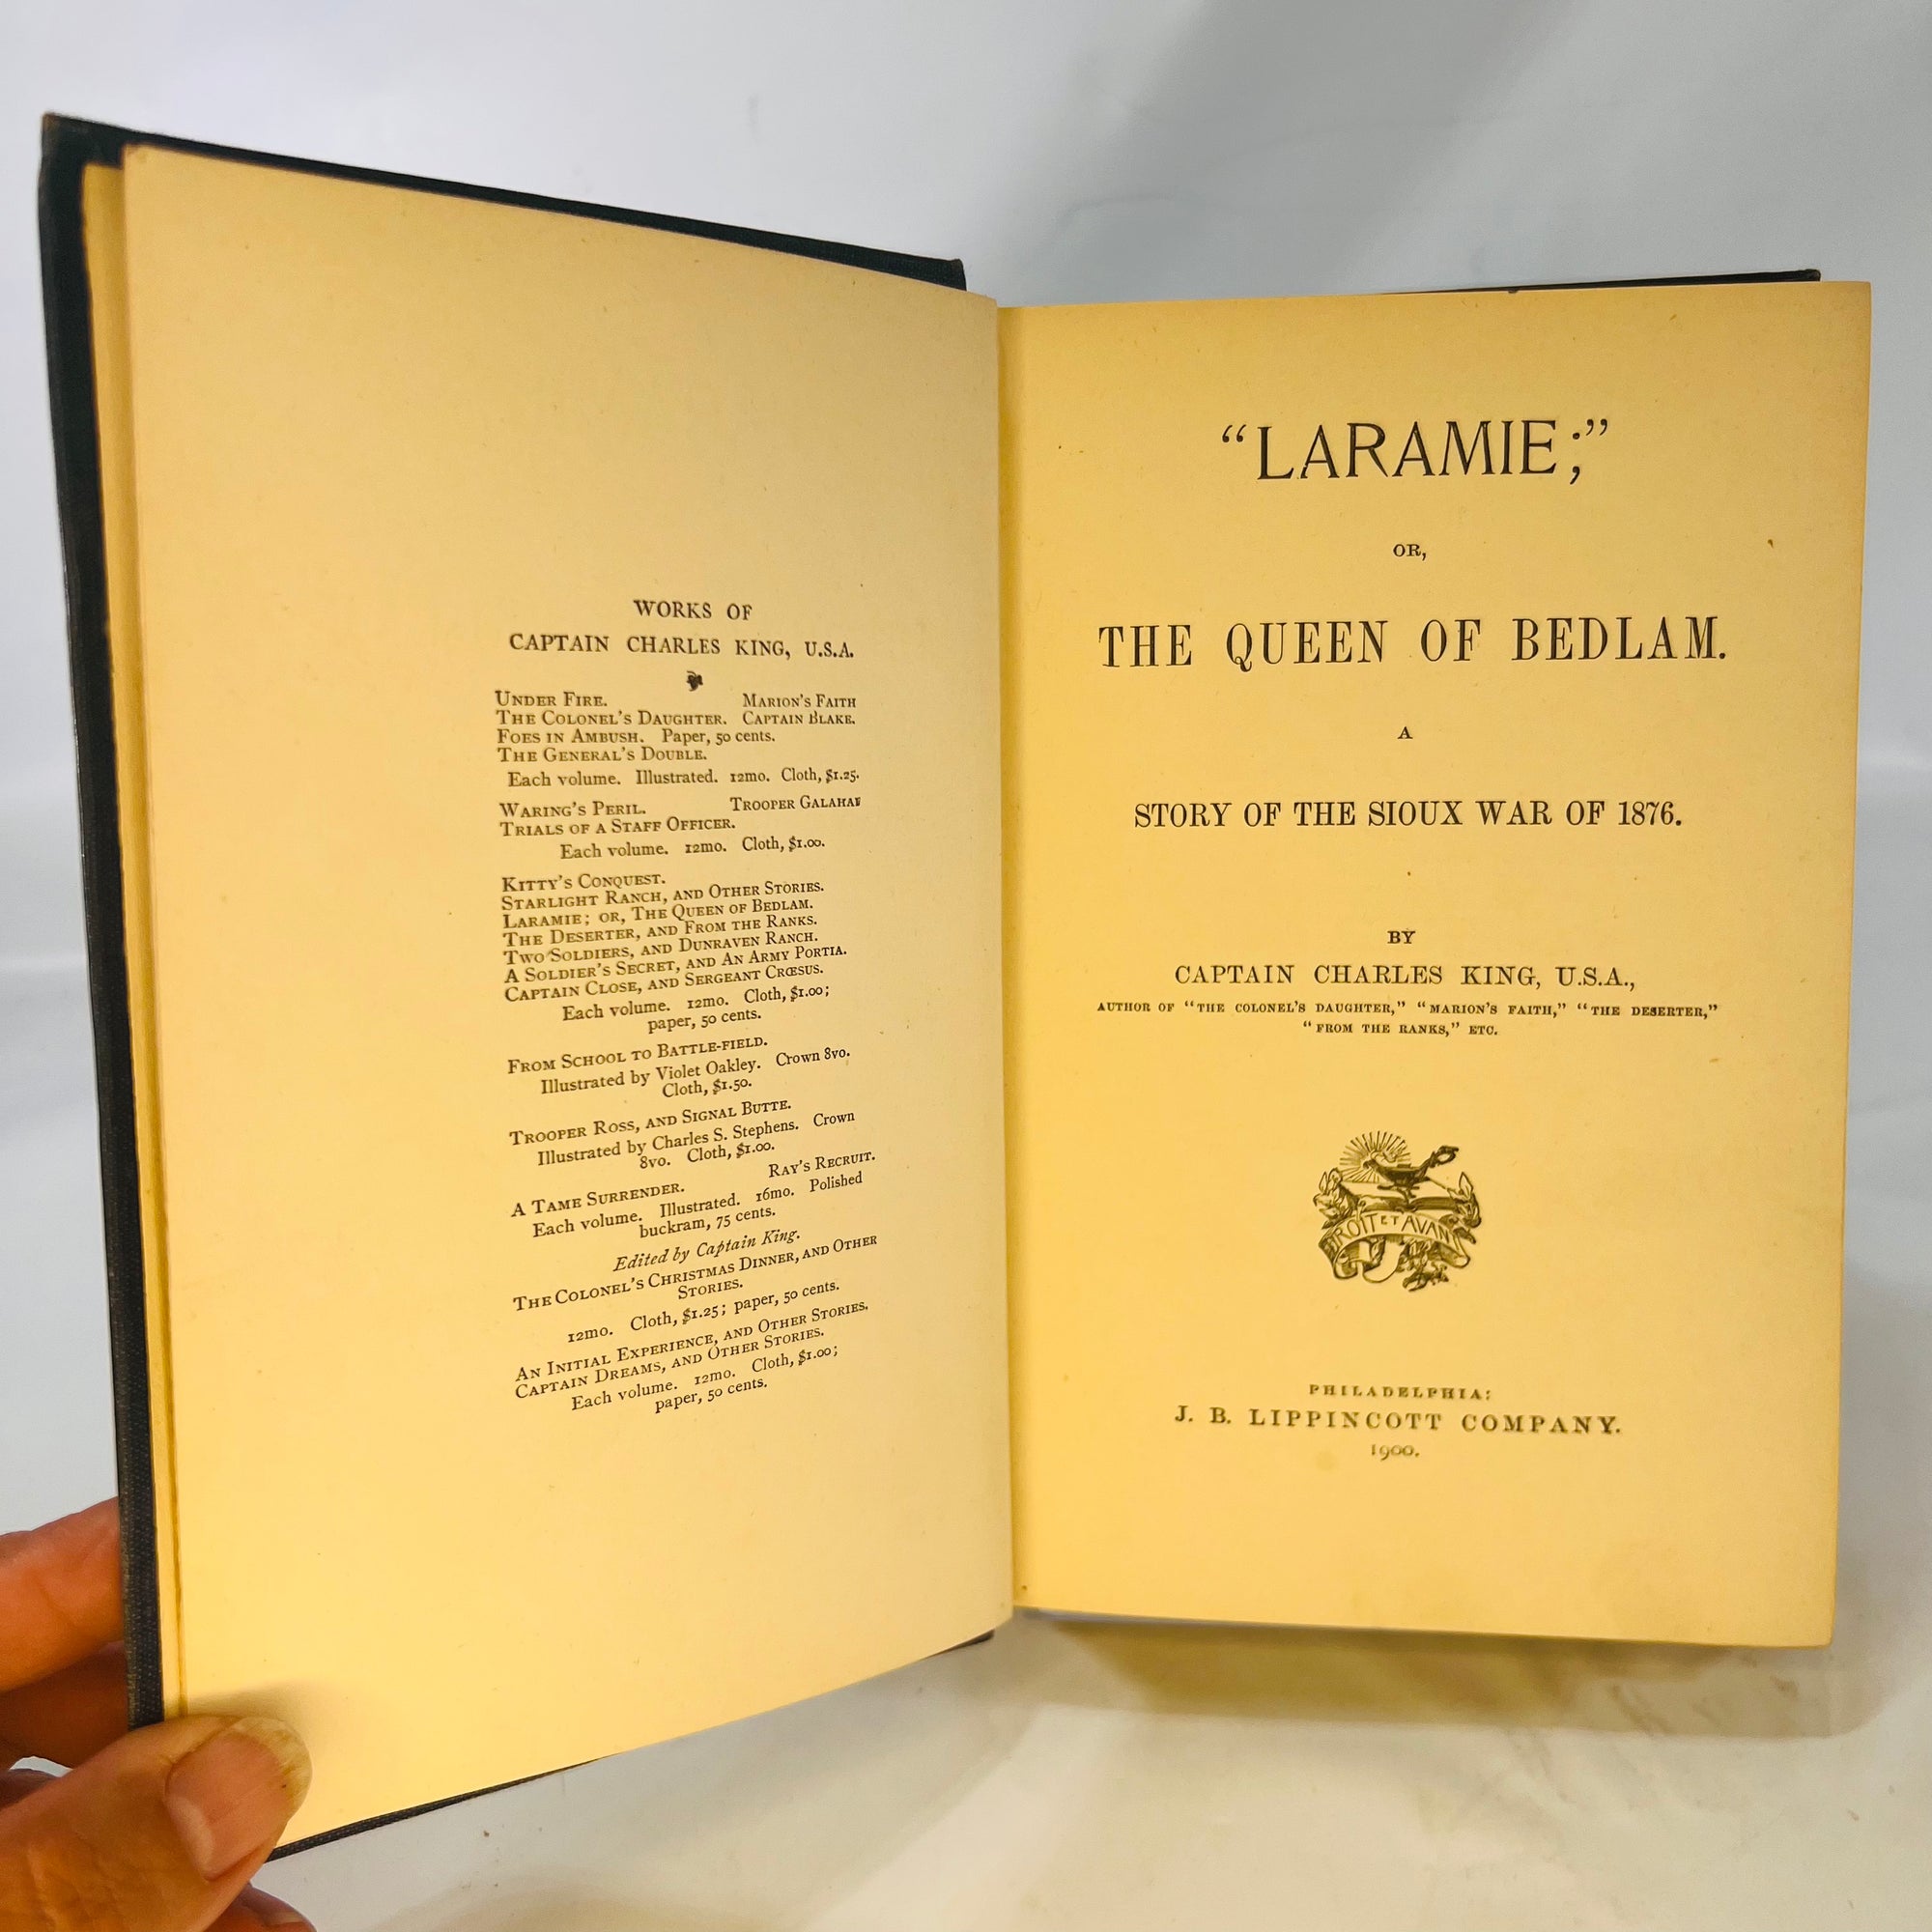 Laramie General or The Queen of Bedlam A Story of the Sioux War of 1876 by Captain Charles King 1900 J.B. Lippincott Companny